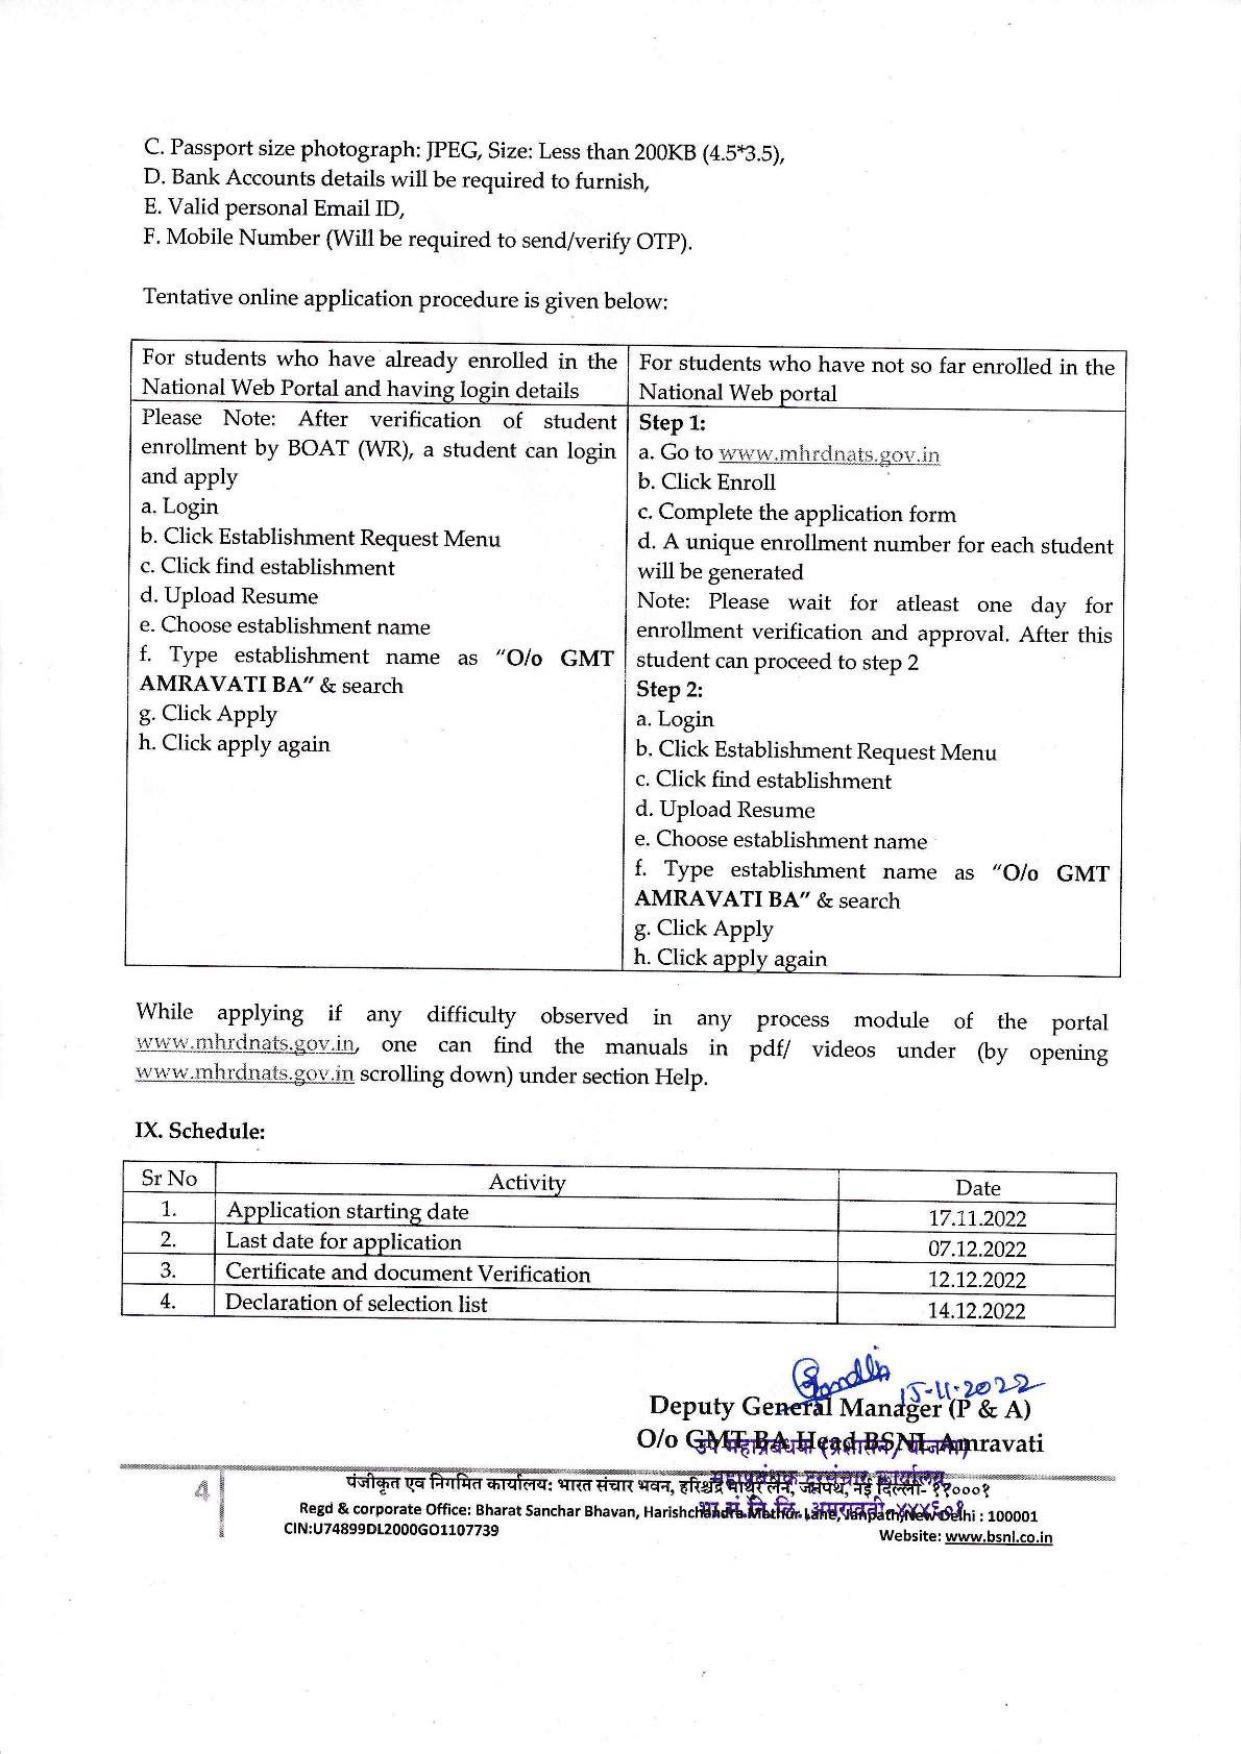 BSNL Invites Application for Apprentice Recruitment 2022 - Page 4